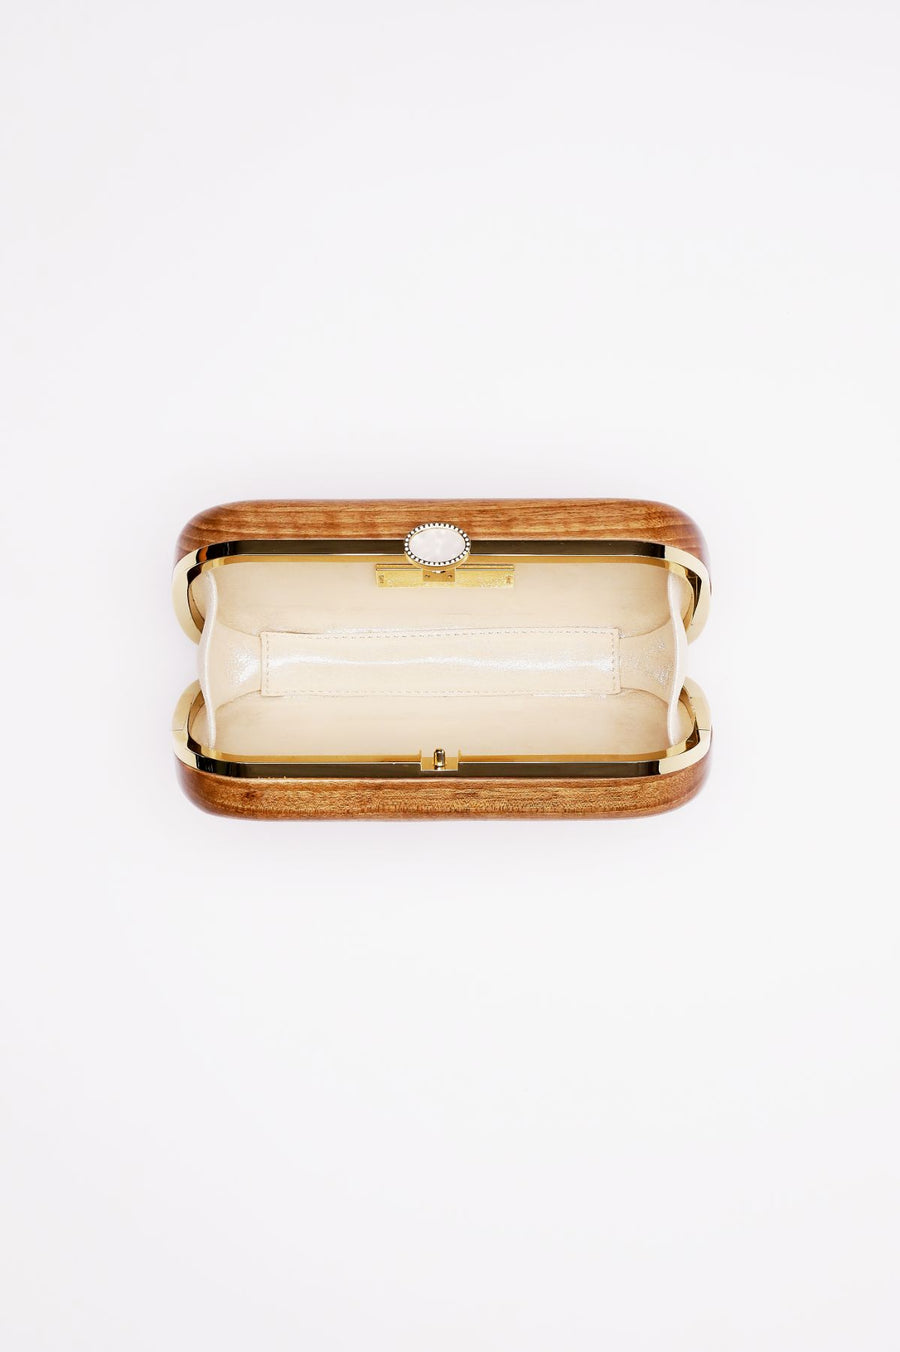 Top open view of Bella Clutch in solid Walnut Wood body with gold hardware frame.